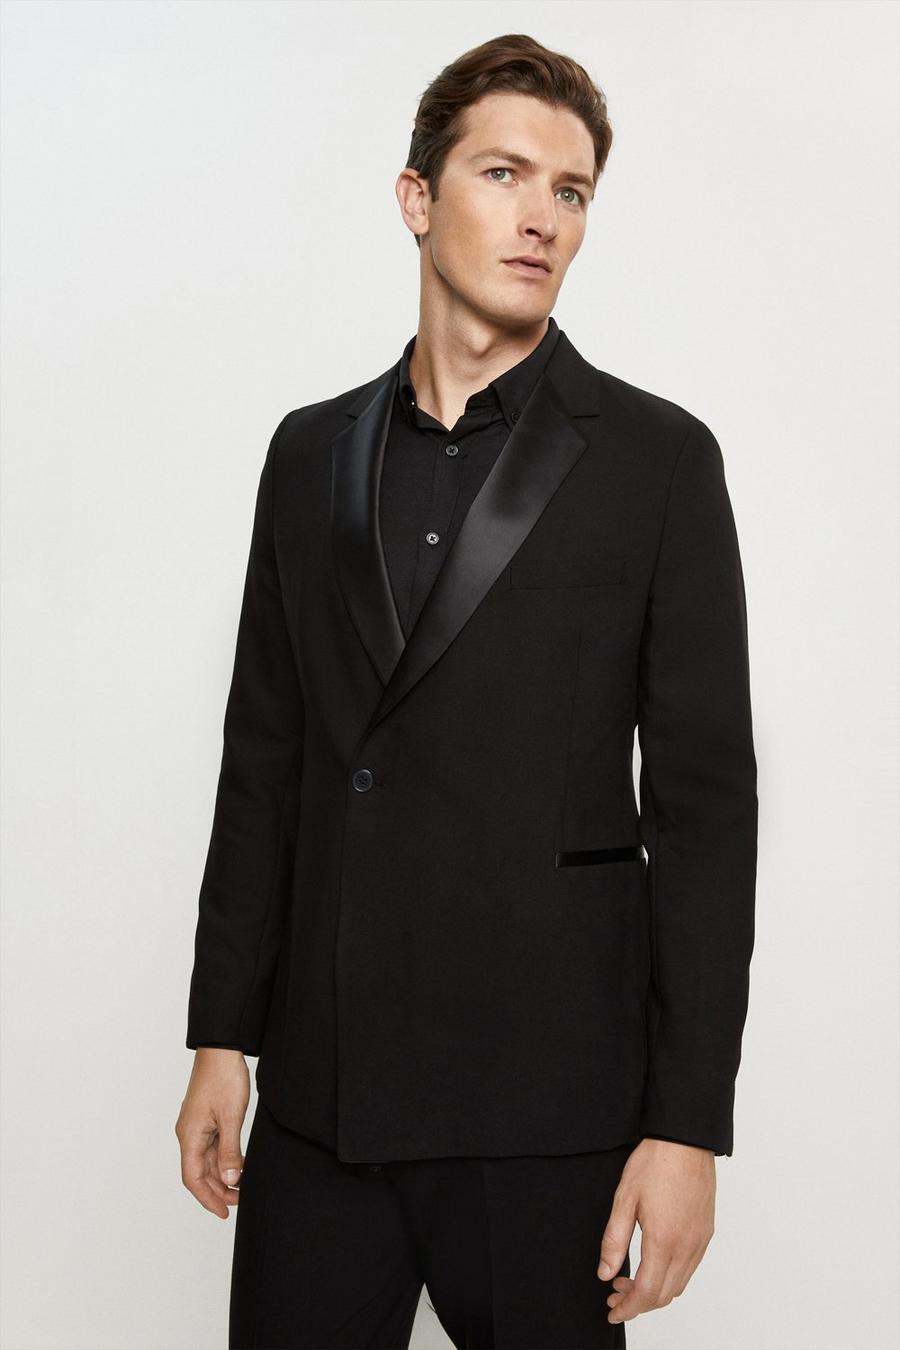 Skinny Fit Black Double Breasted Tuxedo Suit Jacket